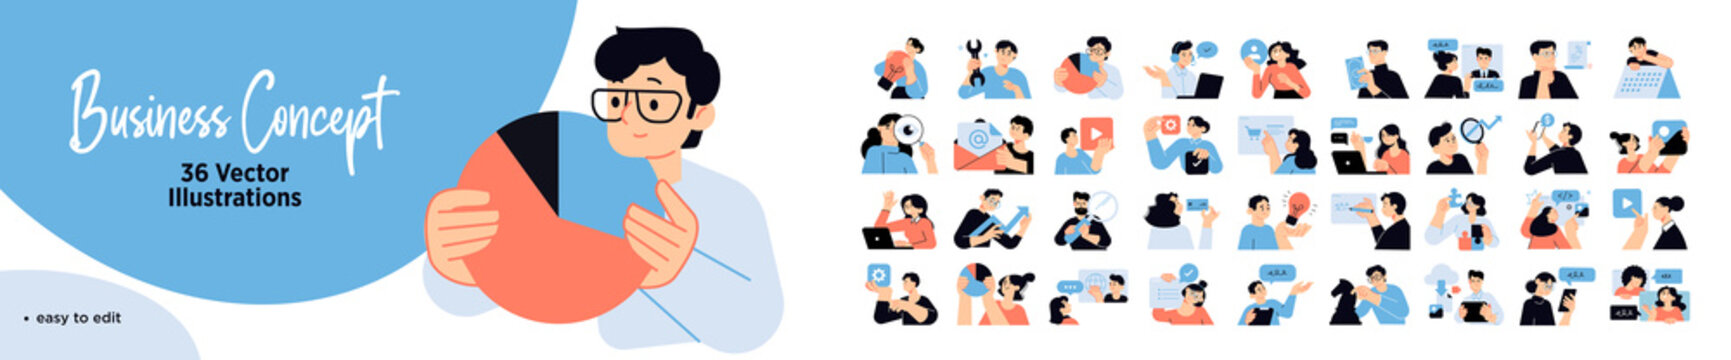 Set of business people illustrations. Flat design vector concepts of business management, online communication, e-commerce, project management, finance and marketing.